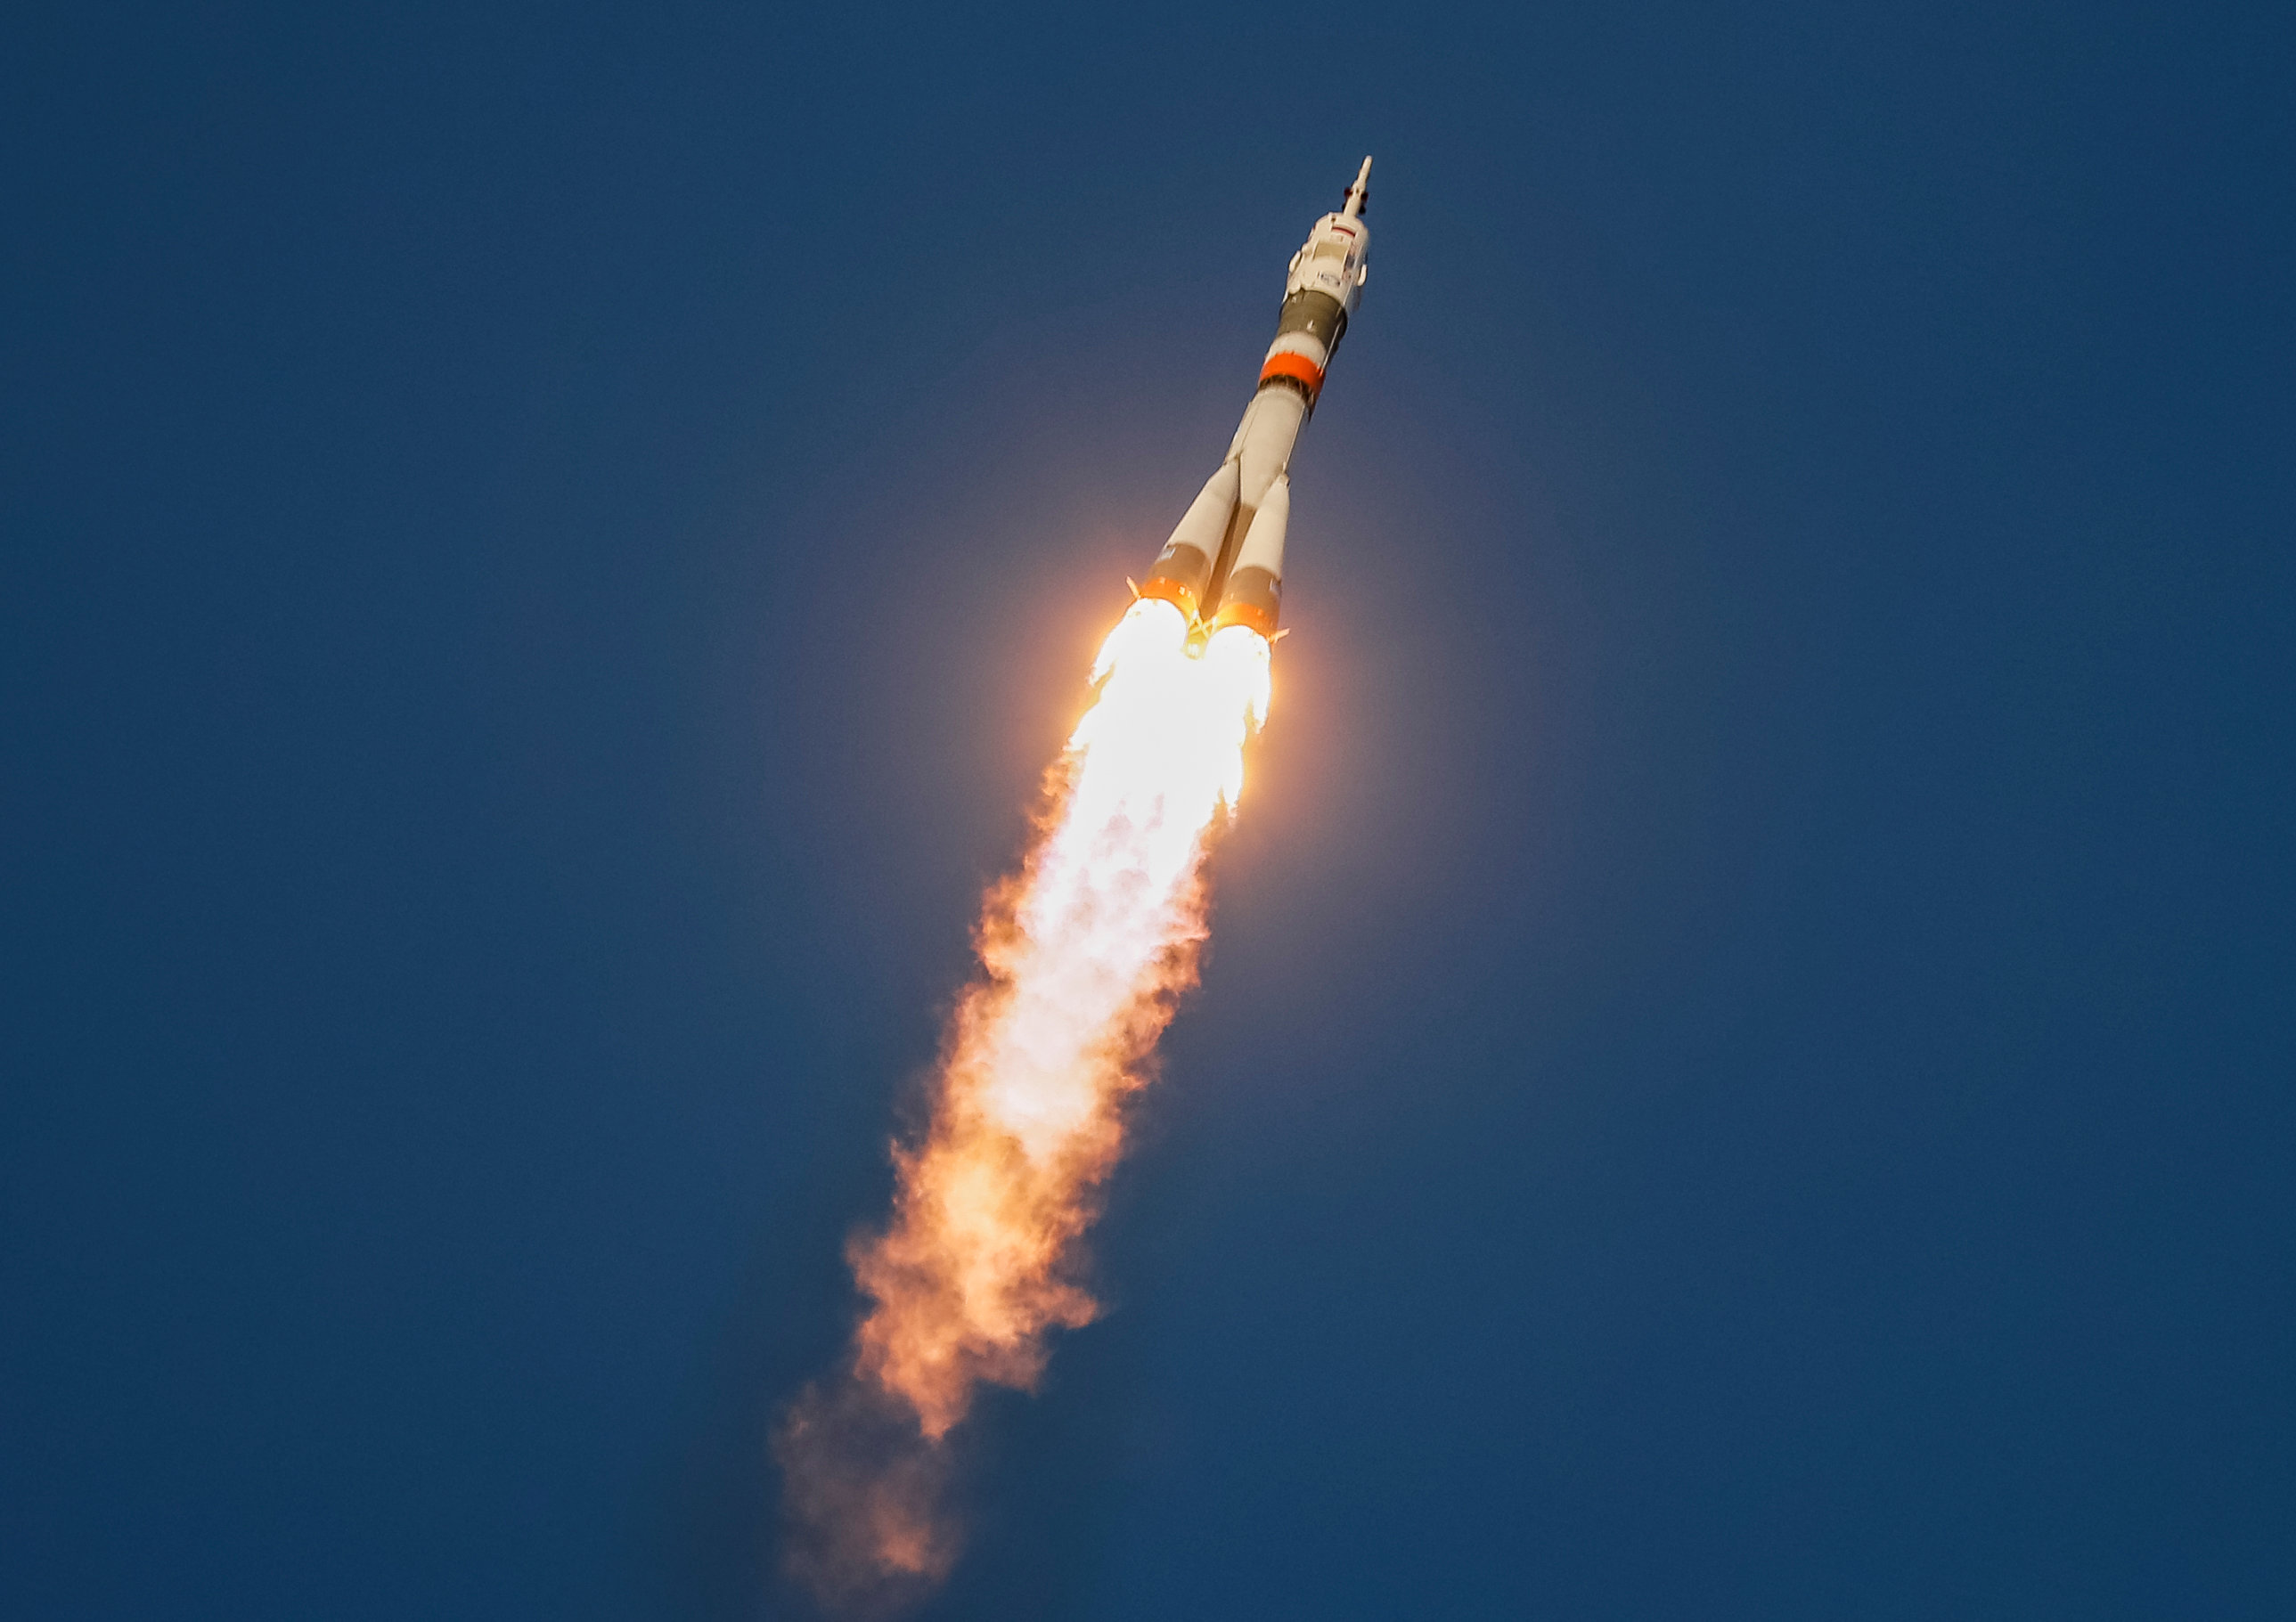 The Soyuz MS-11 spacecraft carrying the crew formed of David Saint-Jacques of Canada, Oleg Kononenko of Russia and Anne McClain of the US blasts off to the International Space Station (ISS) from the launchpad at the Baikonur Cosmodrome, Kazakhstan, on December 3, 2018. Photo: REUTERS